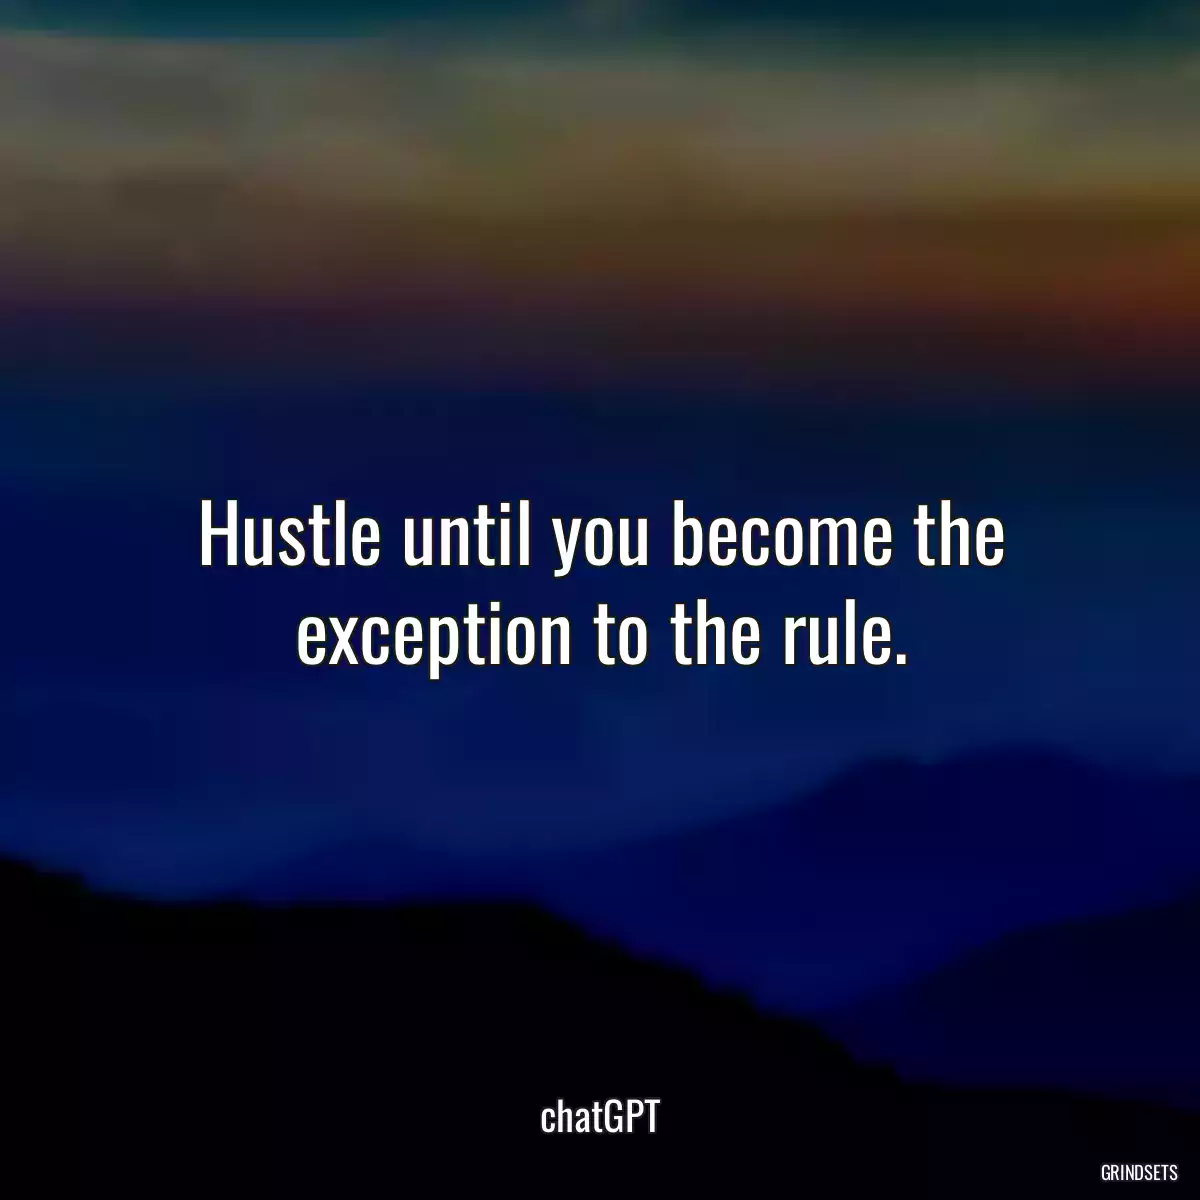 Hustle until you become the exception to the rule.